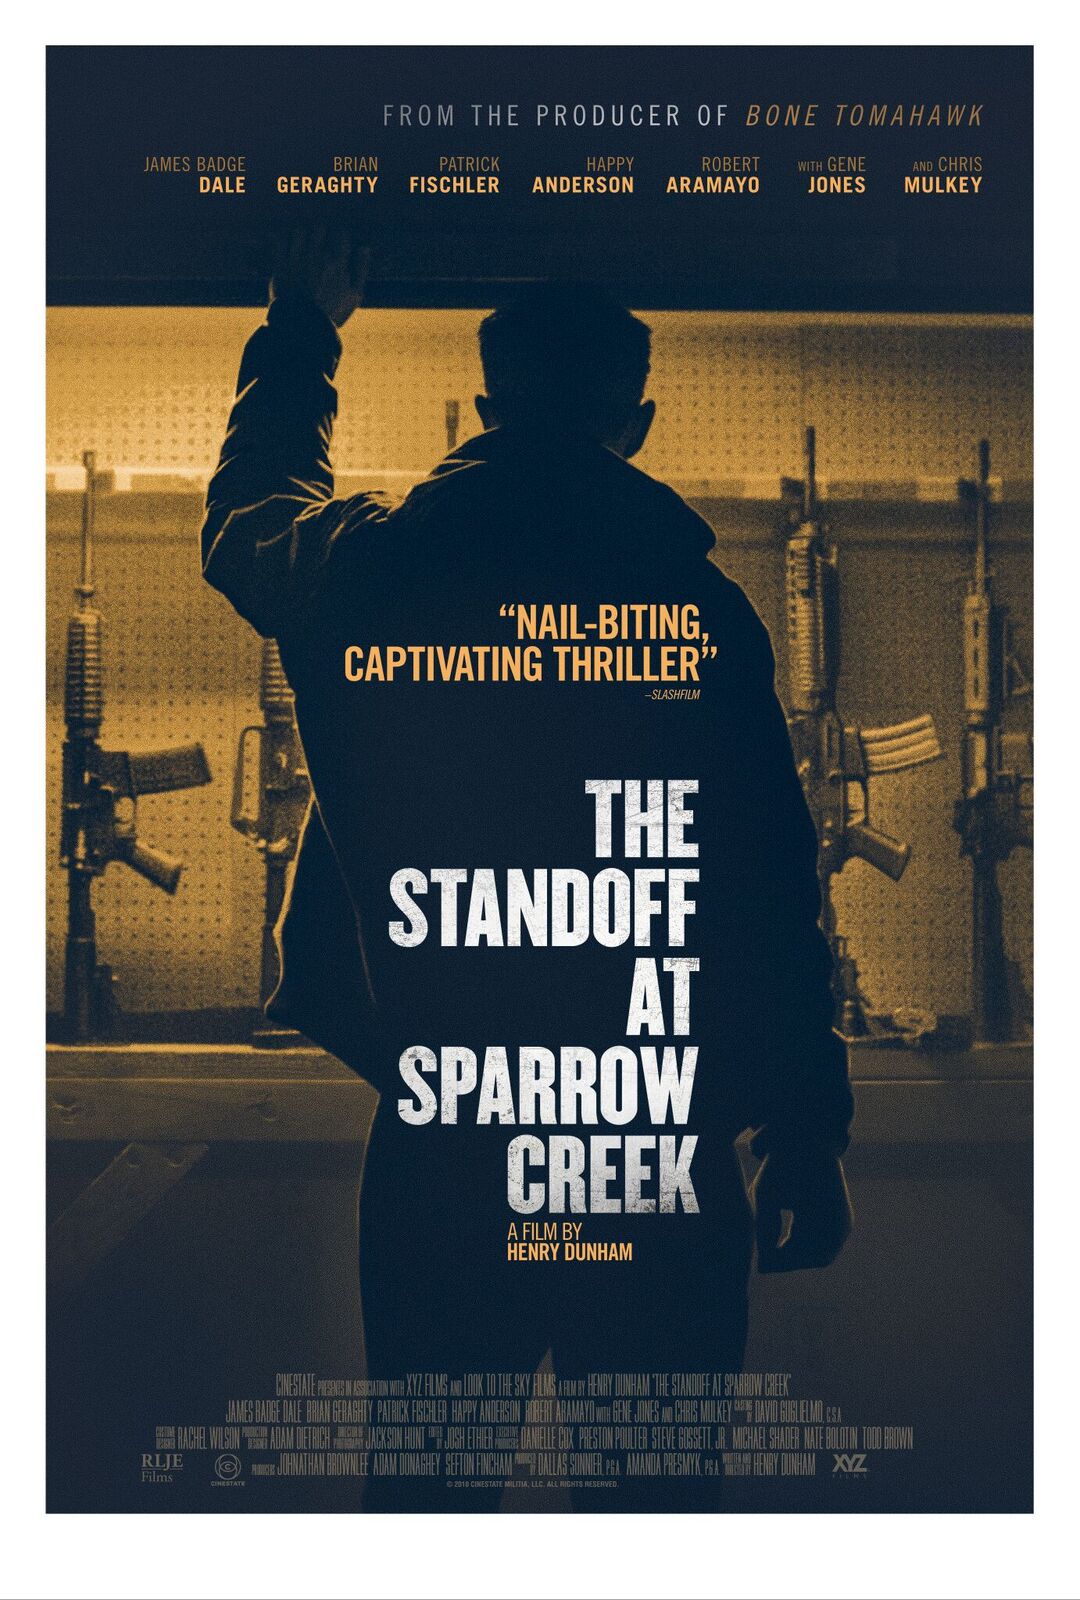 The Standoff at Sparrow Creek Movie Poster - #5002091080 x 1600